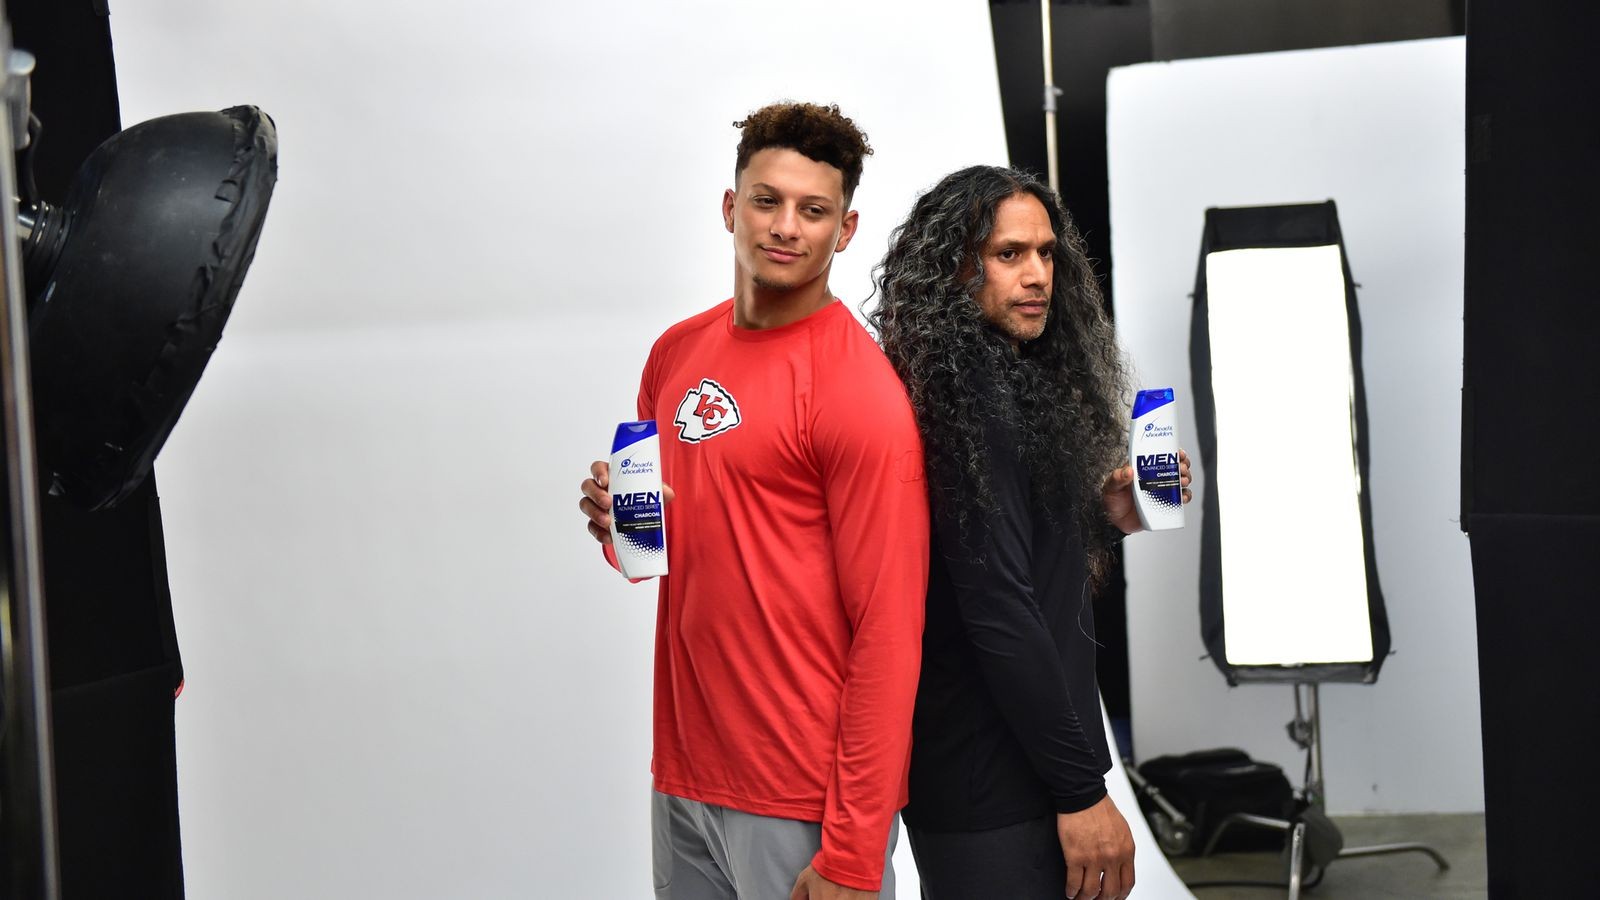 Watch Patrick Mahomes’ new commercial with Troy Polamalu